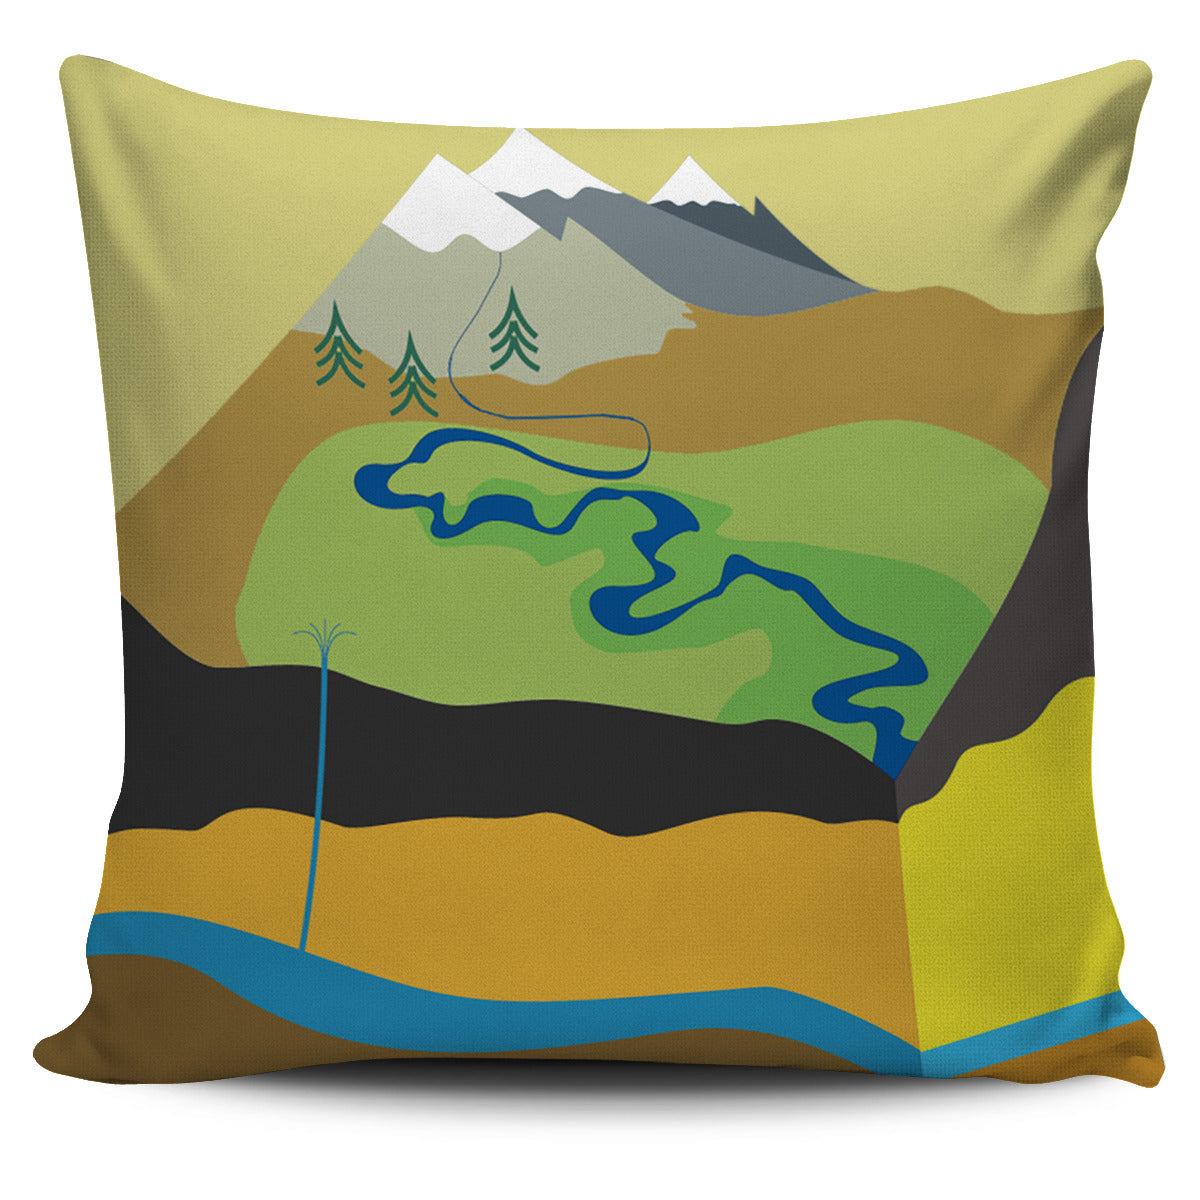 Geologist Pillow Cover